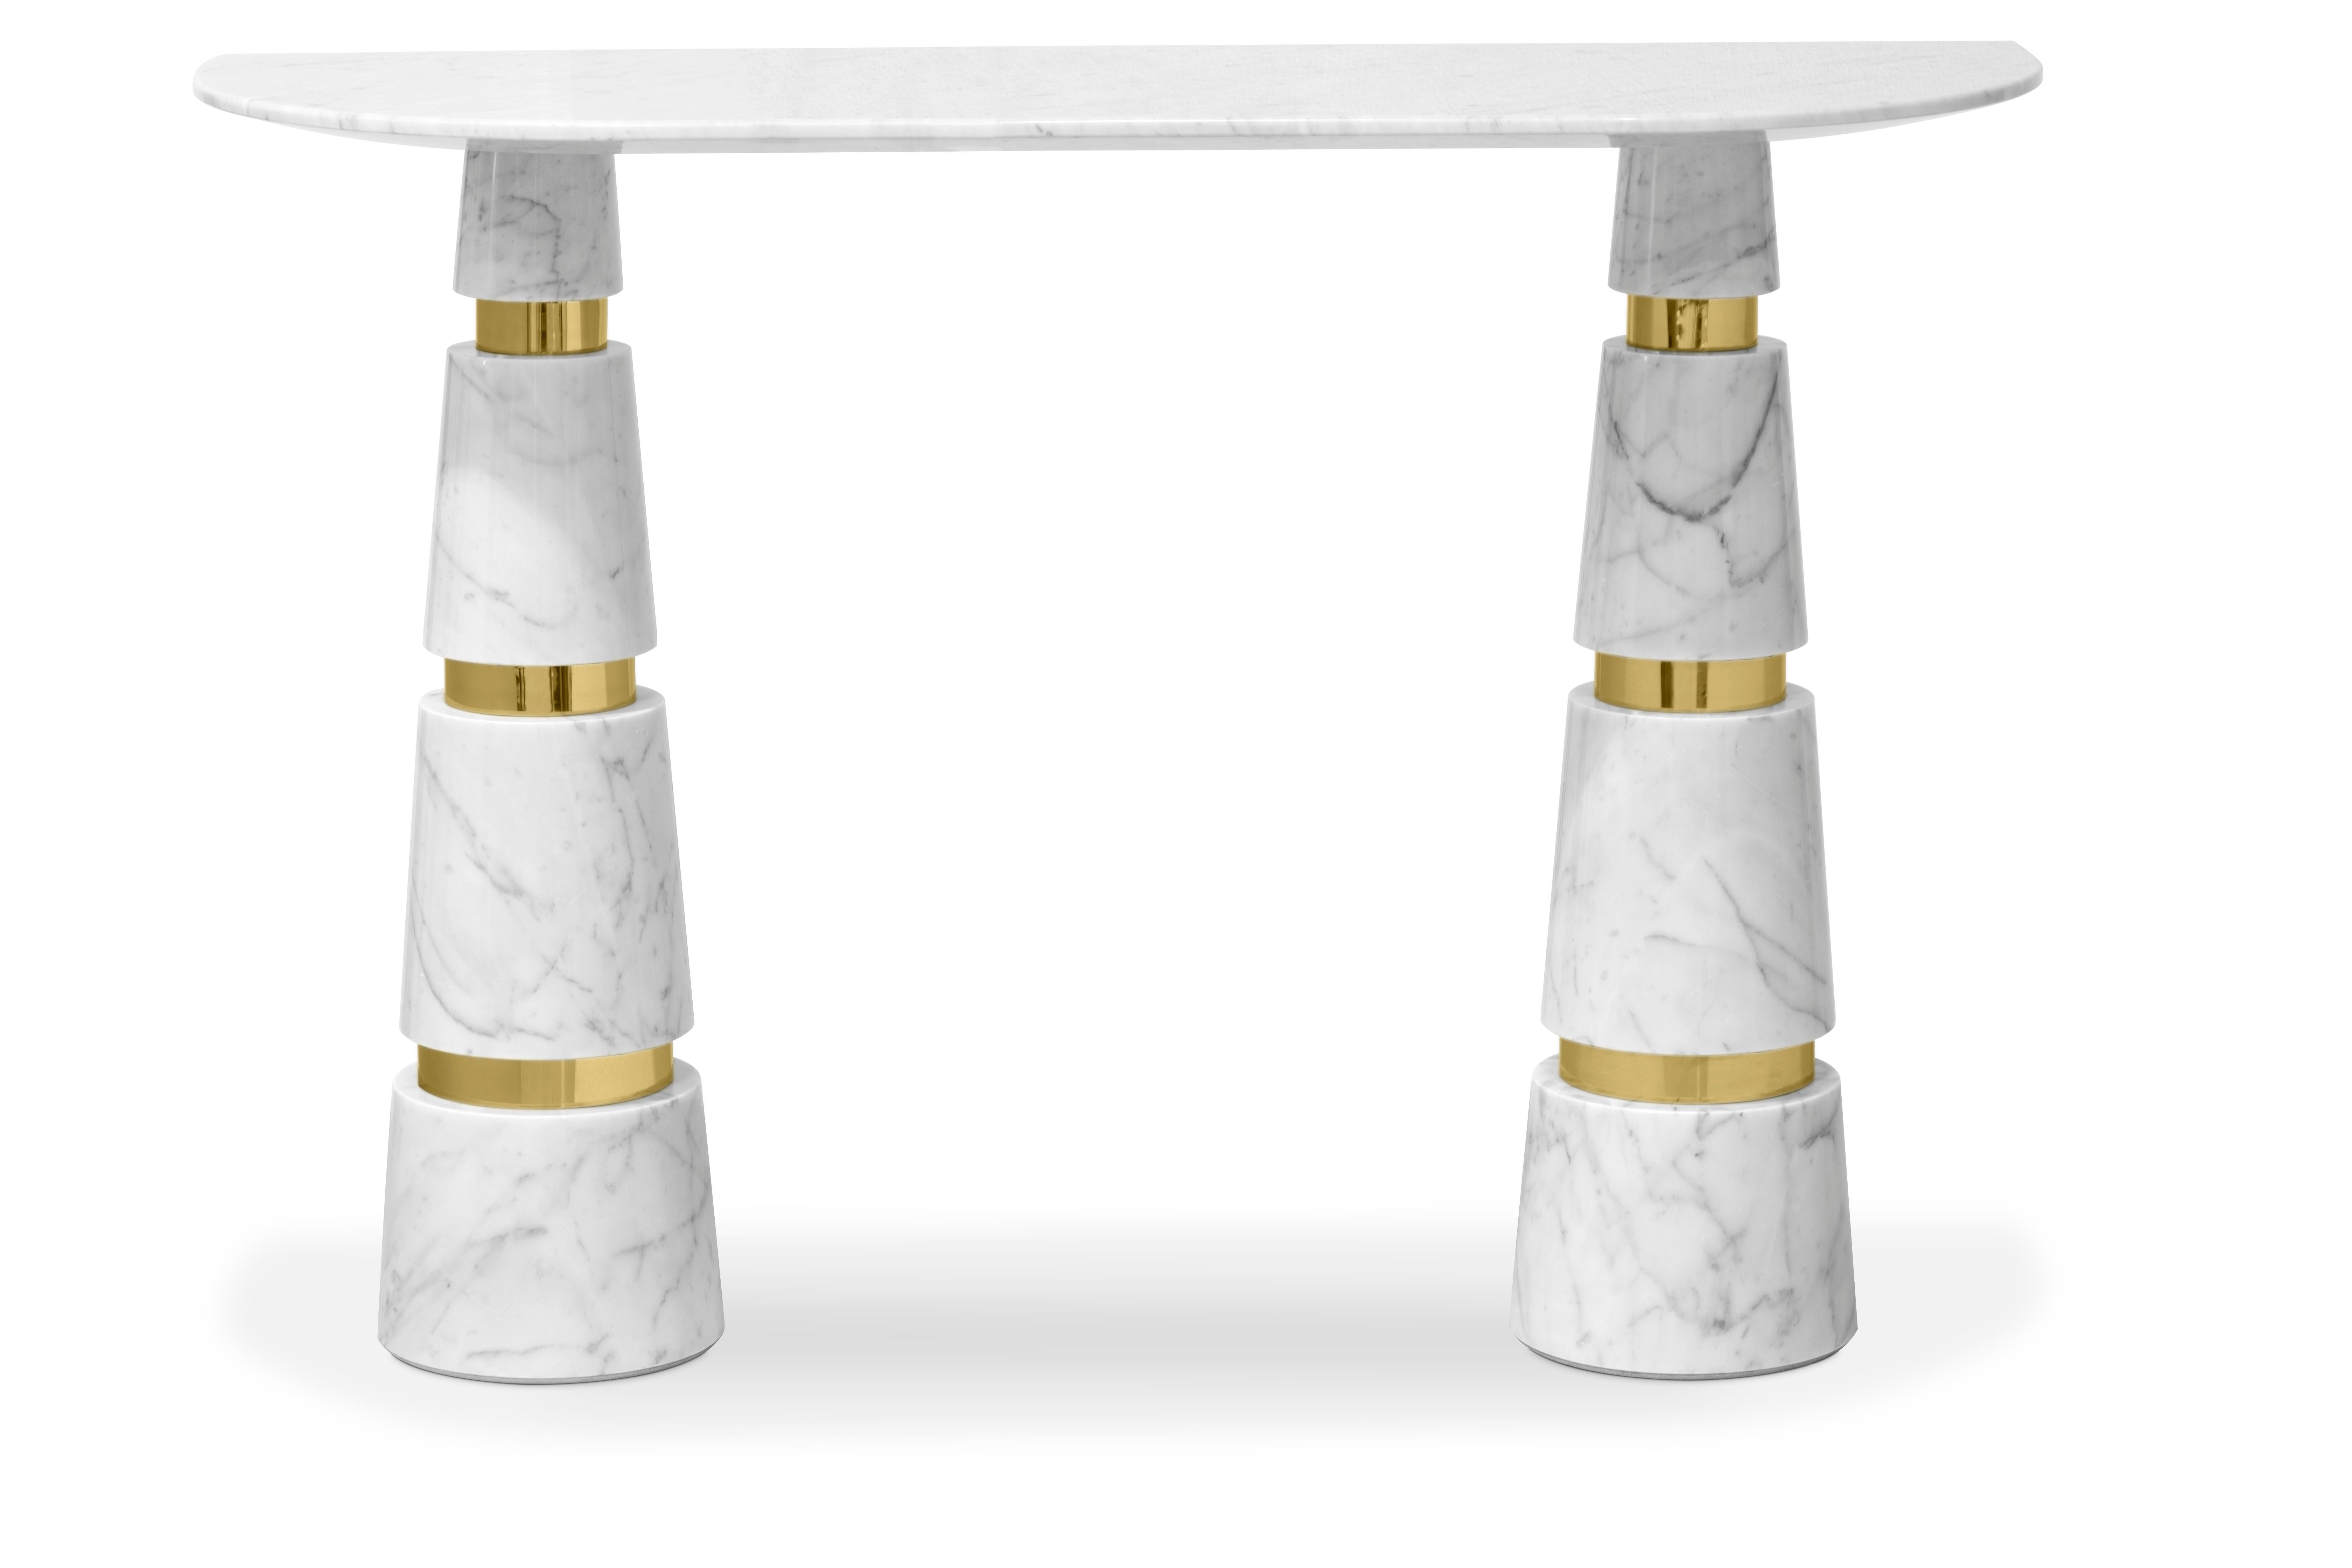 Drawing you in with a luxurious white-and-gray marble and striking conal legs, the Avalanche console is an icon of contemporary style. The modern shape and elegantly bright whites will bring your interiors into the future, where everything is sleek,